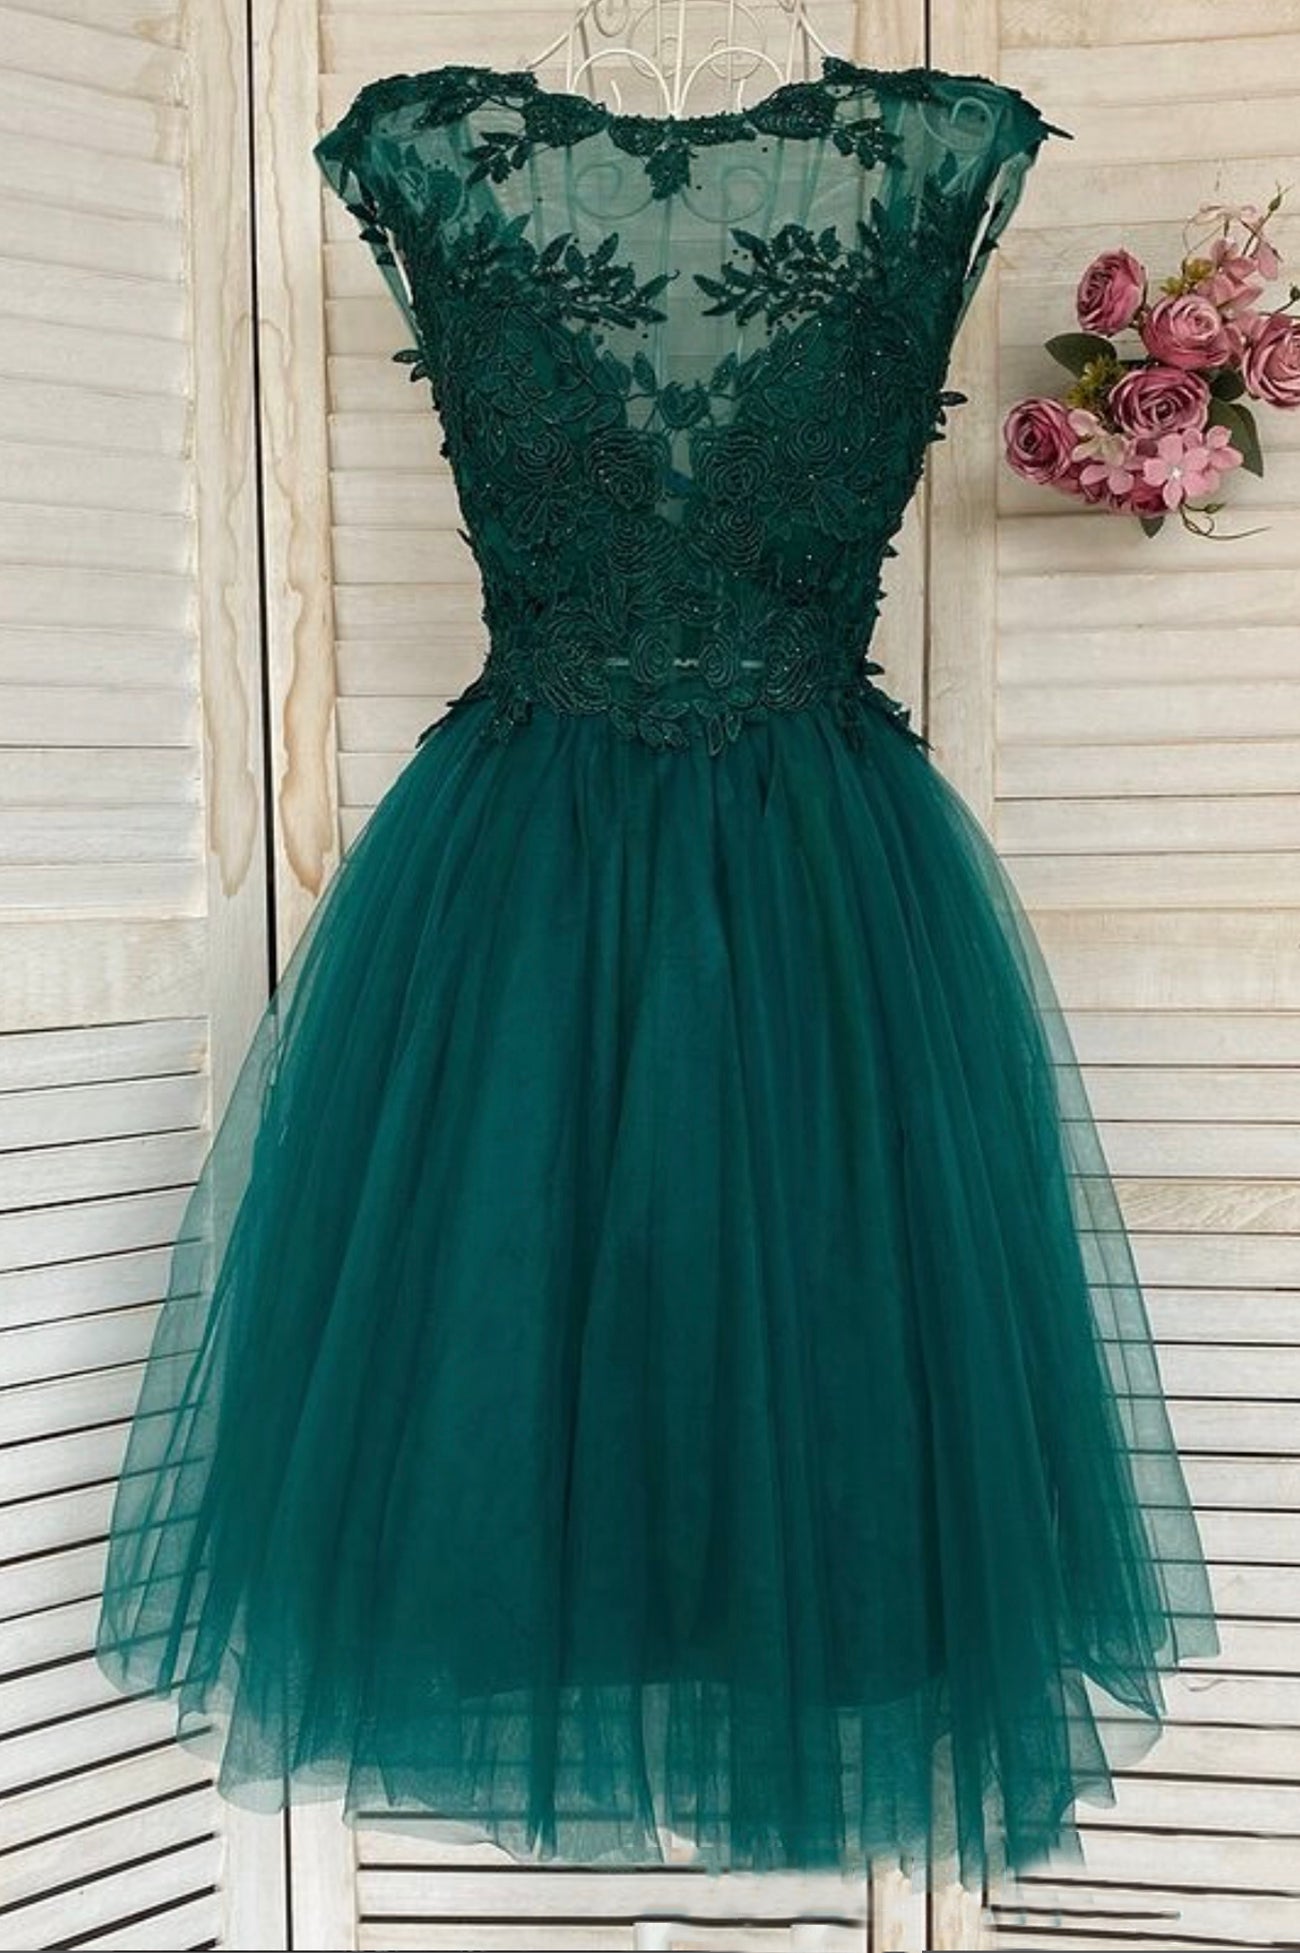 Prom Dresses Open Back, Green Lace Short Prom Dress, A-Line Homecoming Dress